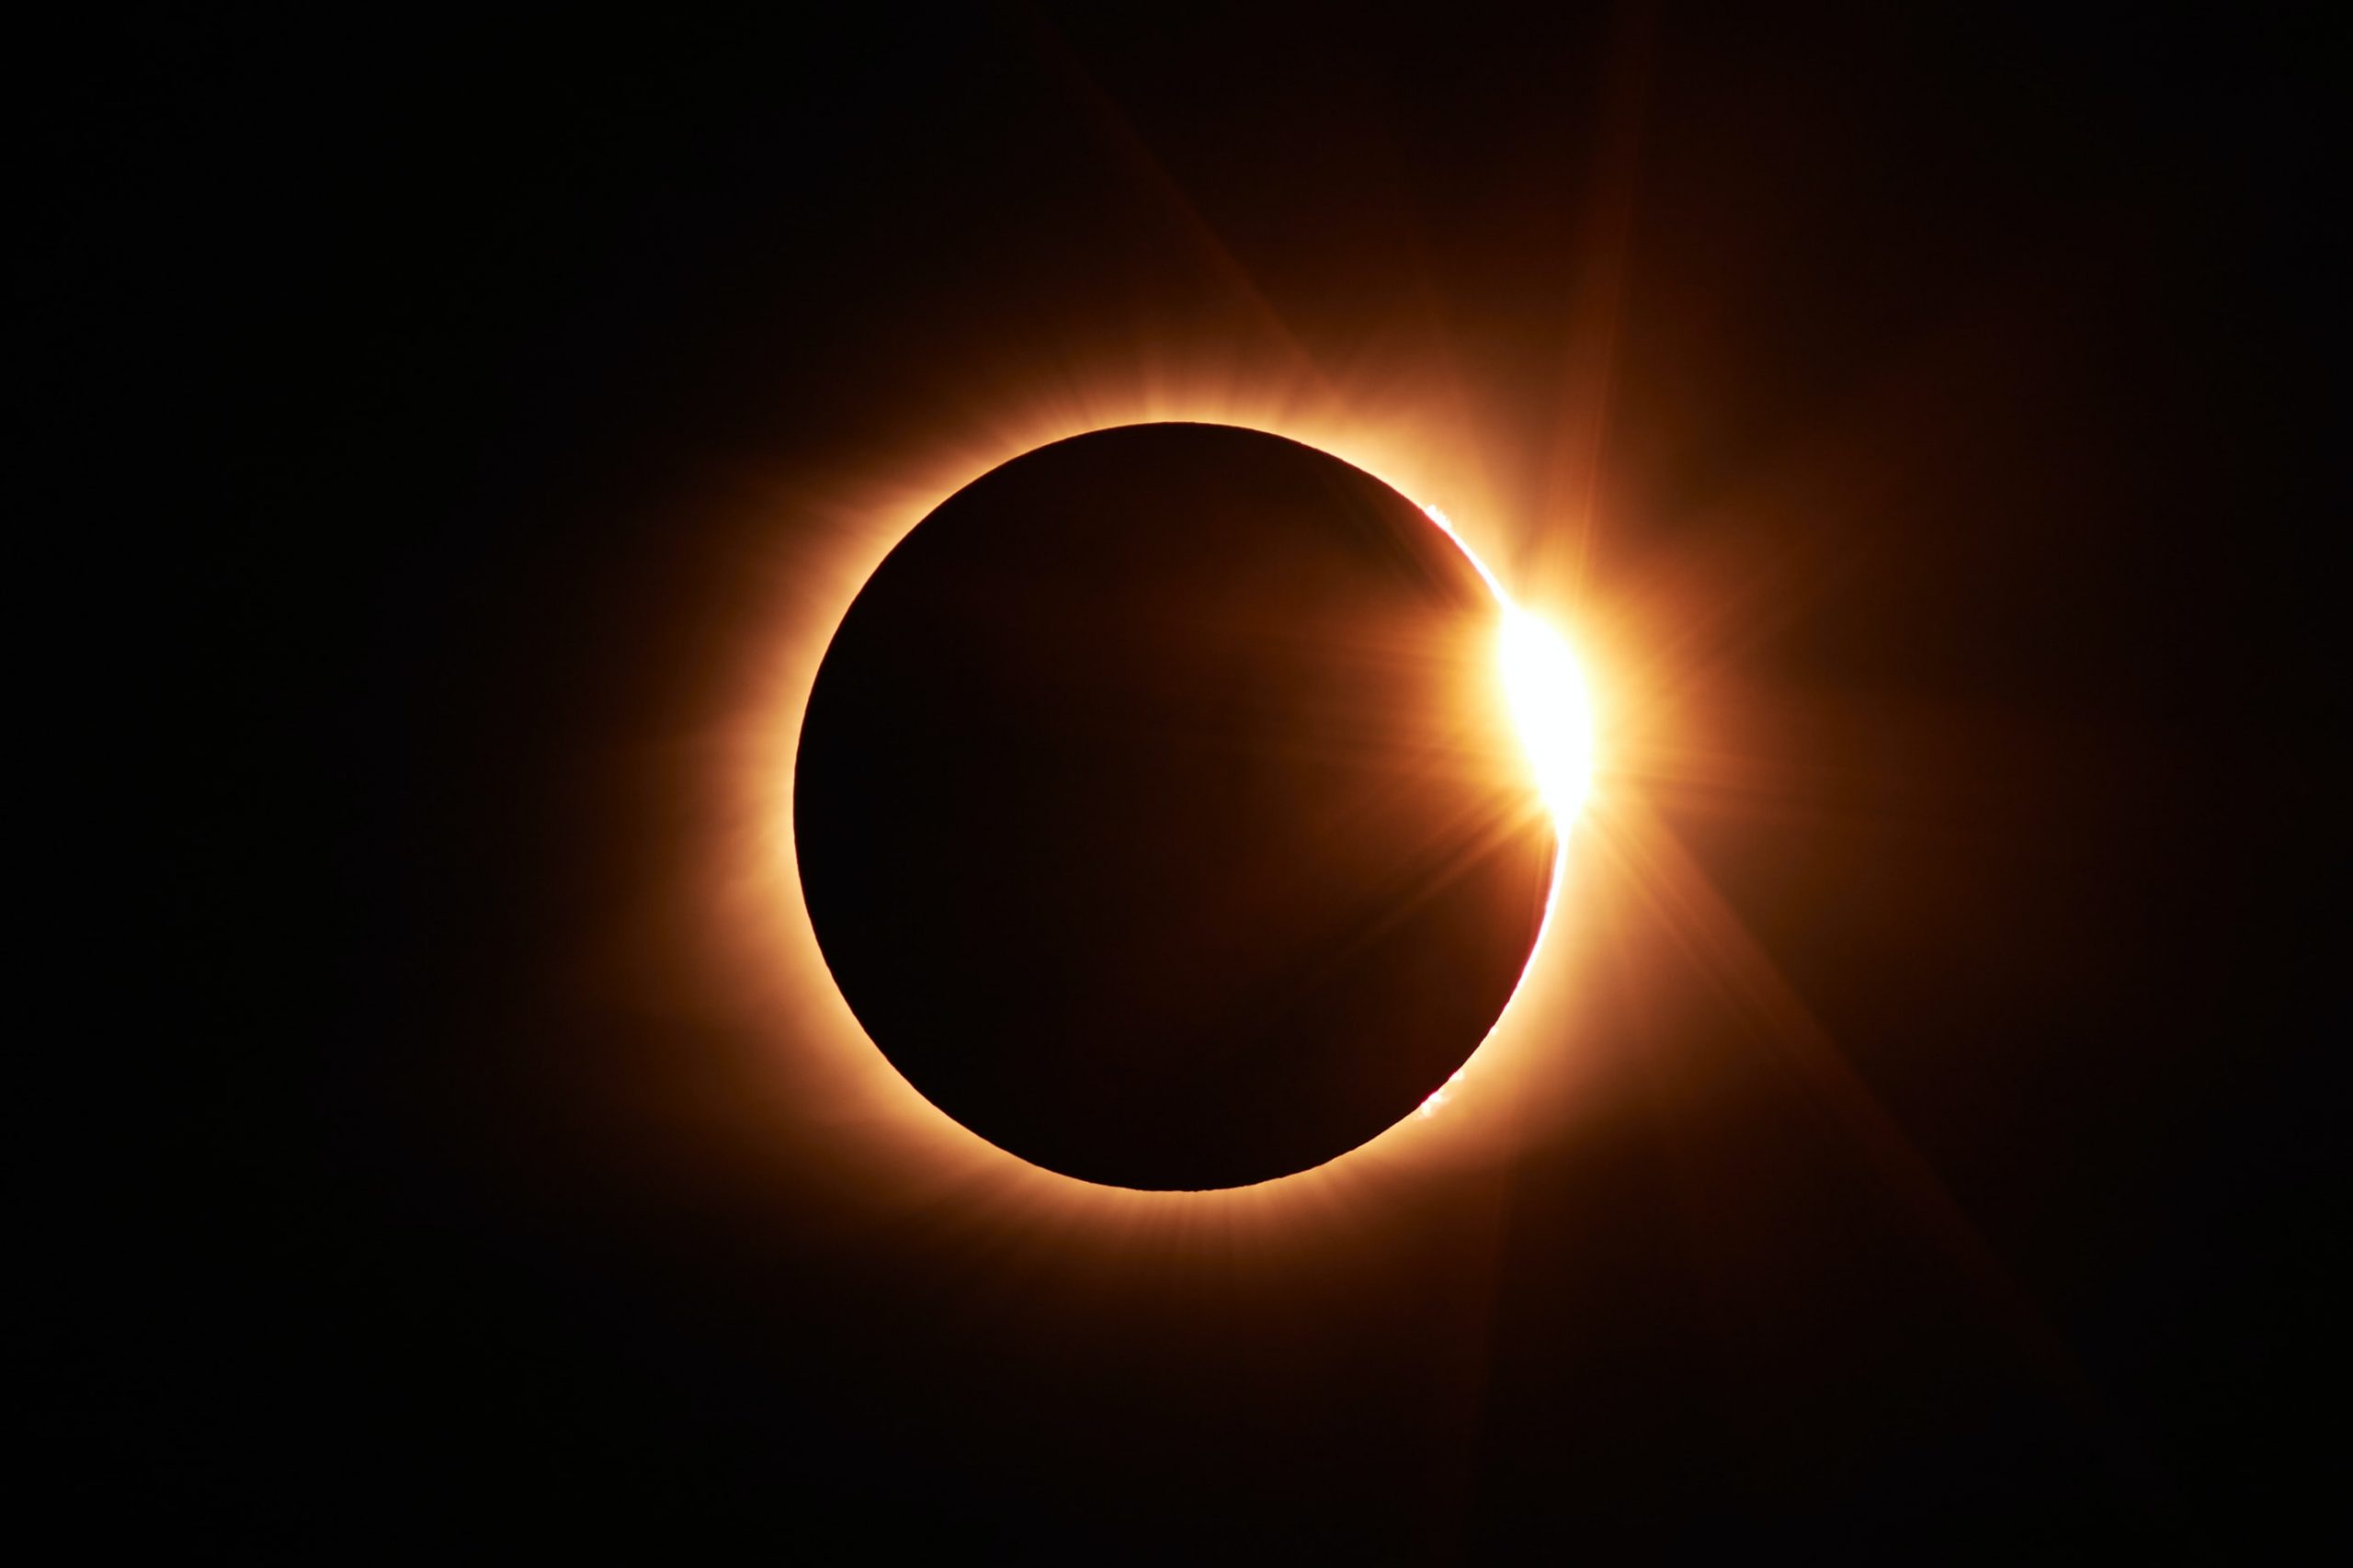 Rare 'Ring of Fire' Solar Eclipse visible in PH this Sunday VisMin.ph